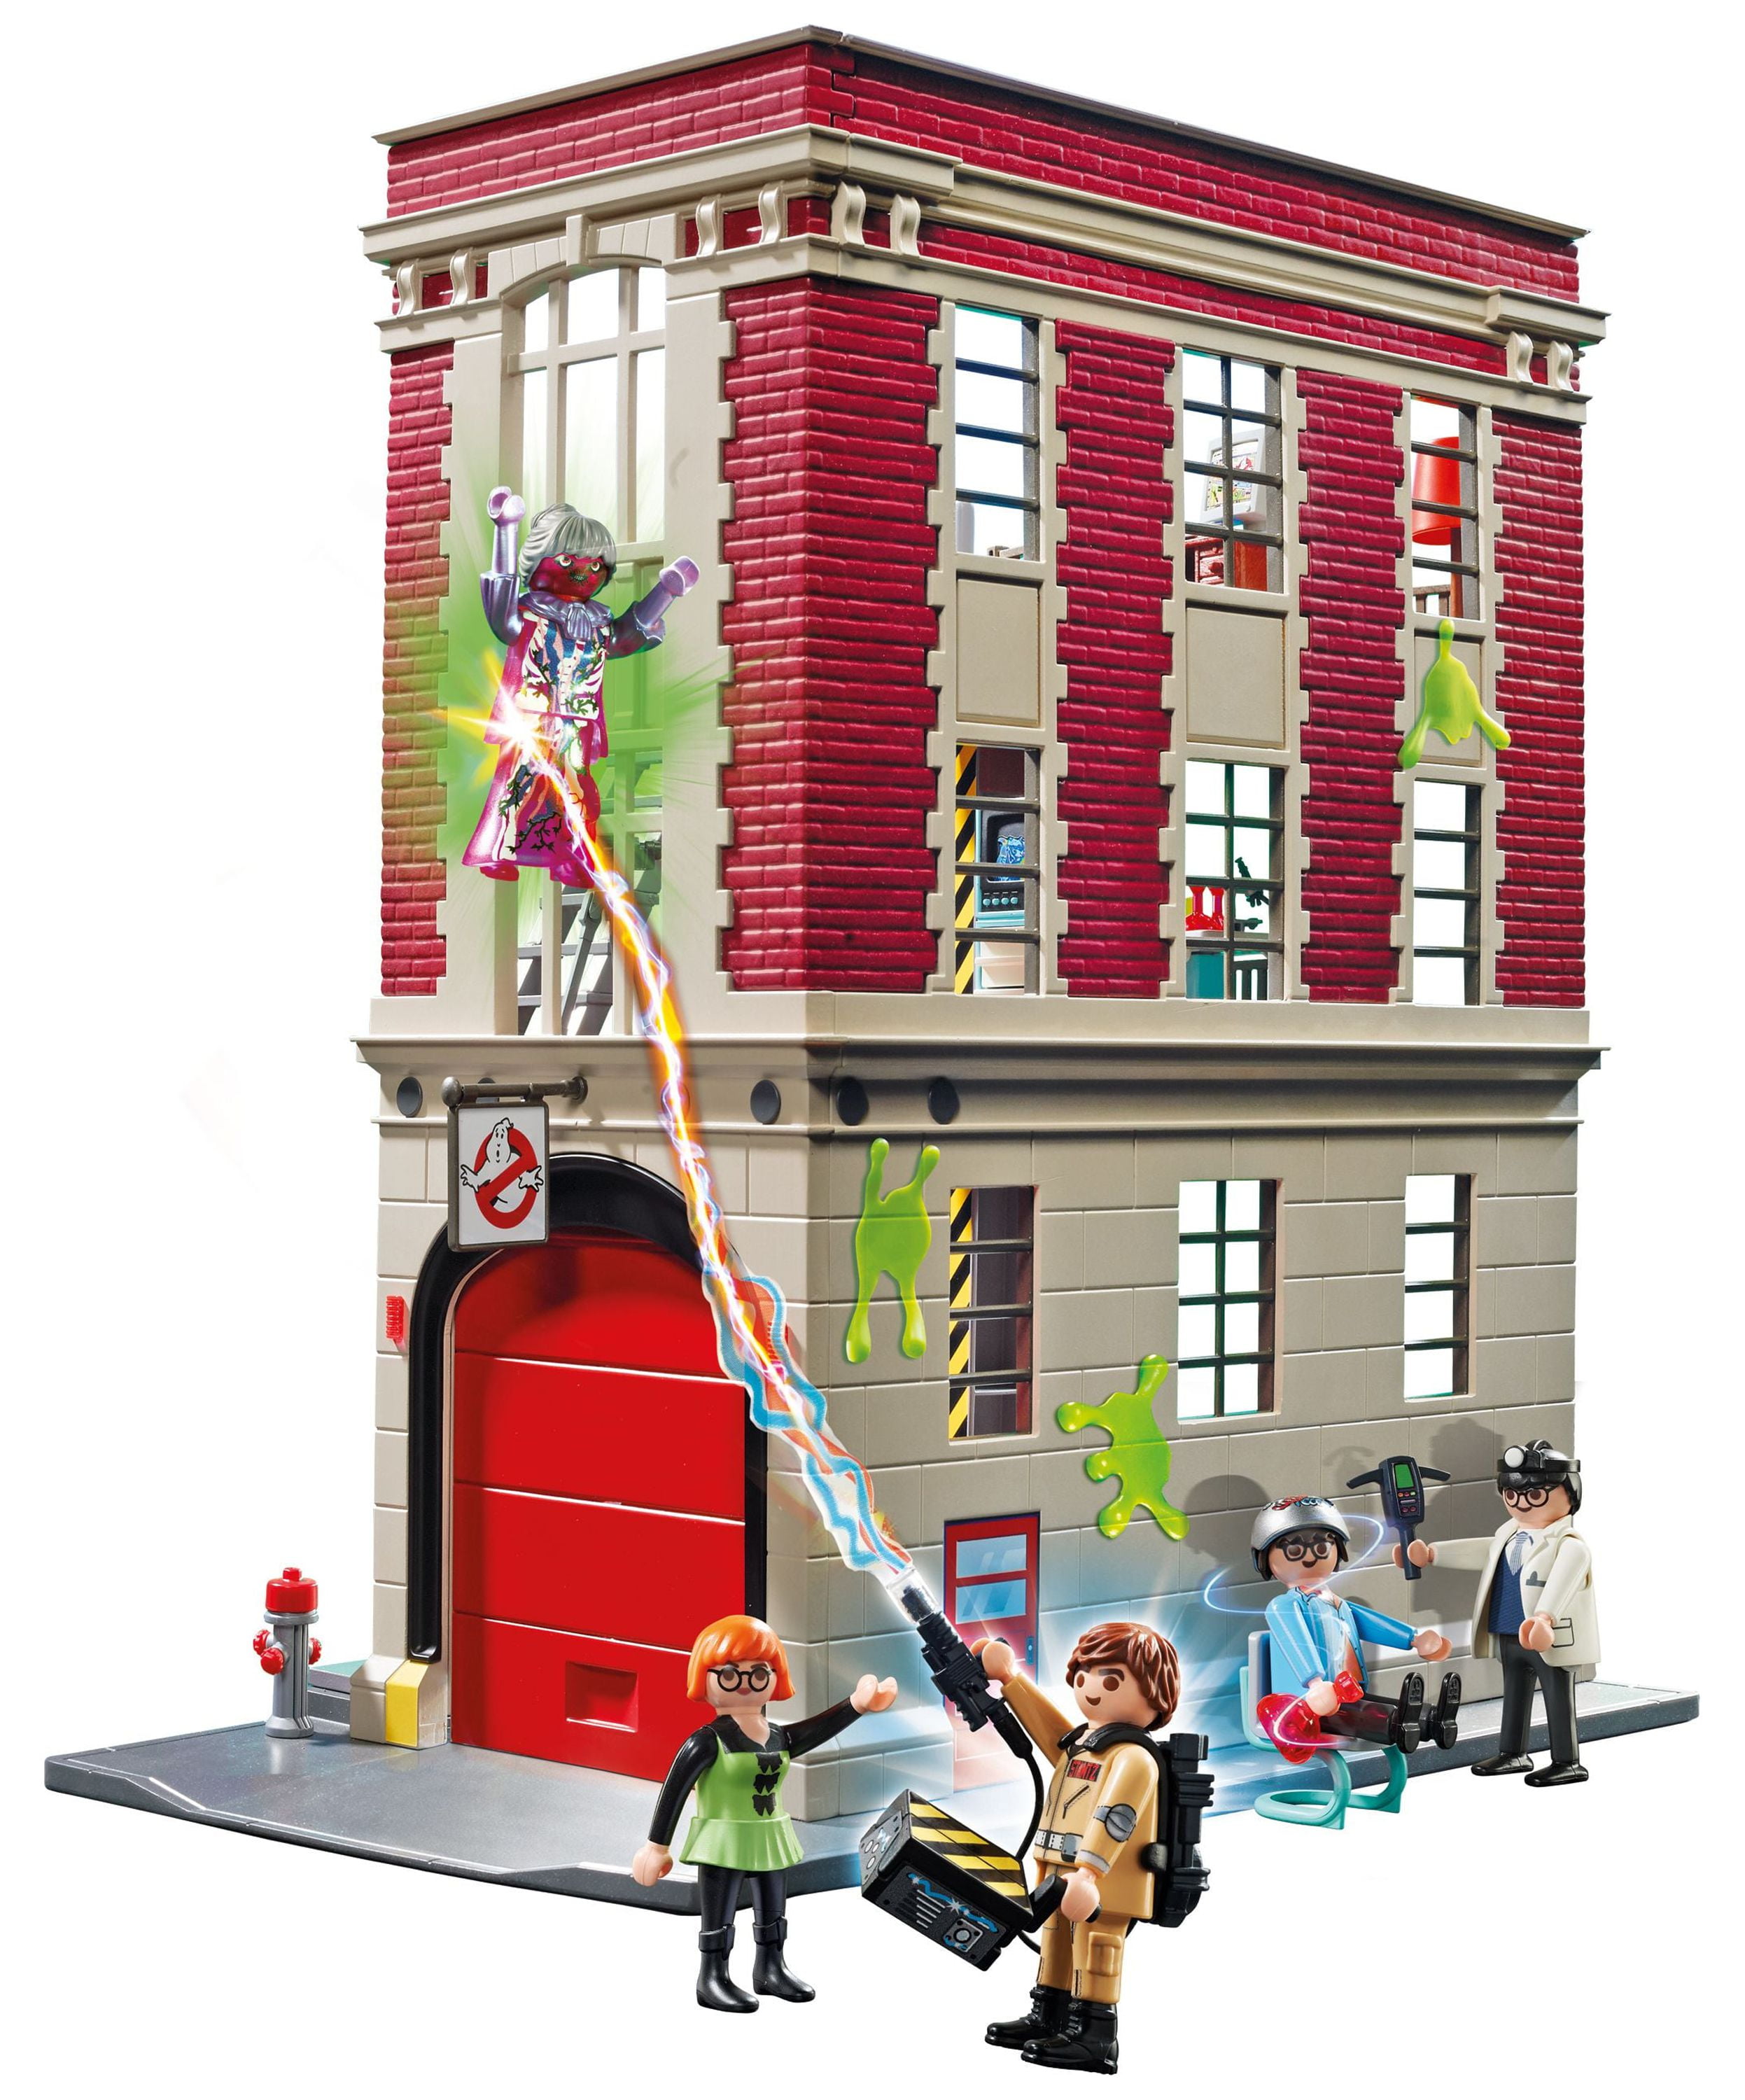 PLAYMOBIL Ghostbusters Firehouse